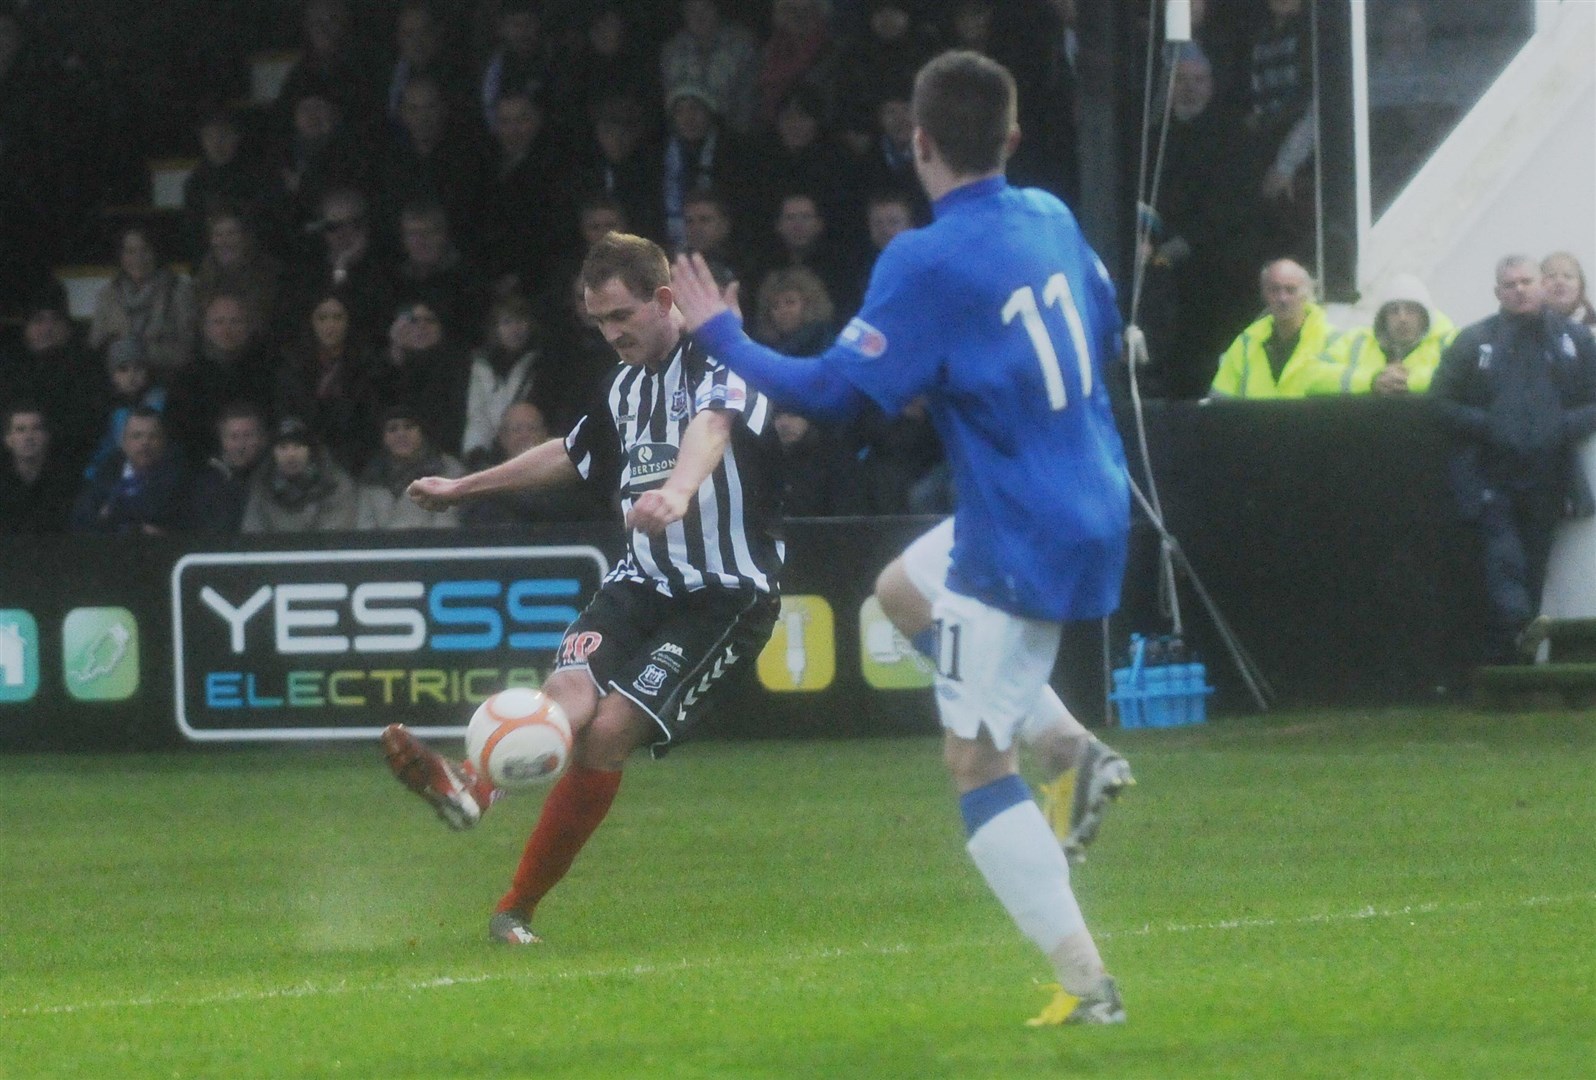 Mark Nicolson scores for Elgin City against Rangers when the Glasgow giants visited Borough Briggs on league business just before Christmas, 2012.